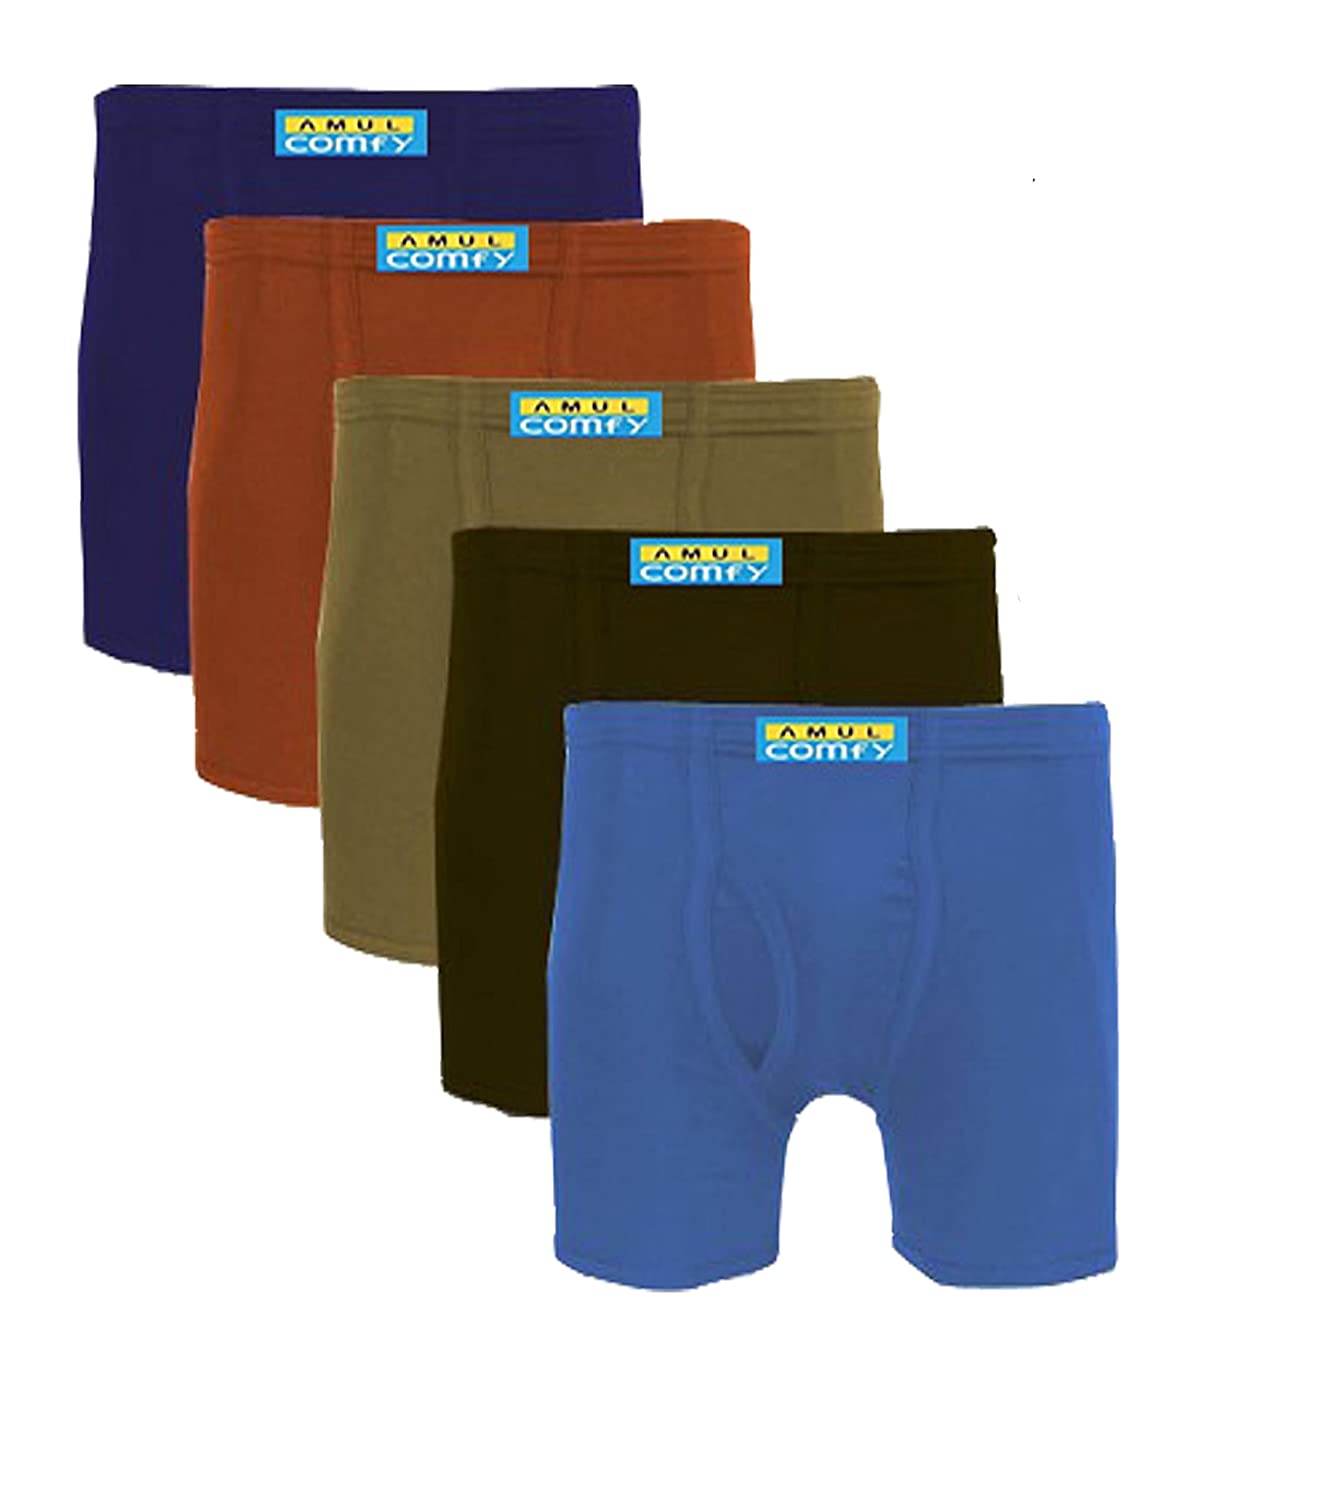 YOUNG INDIA GENTS RIB LONG TRUNK 80 TO 100 PACK OF 5 PCS